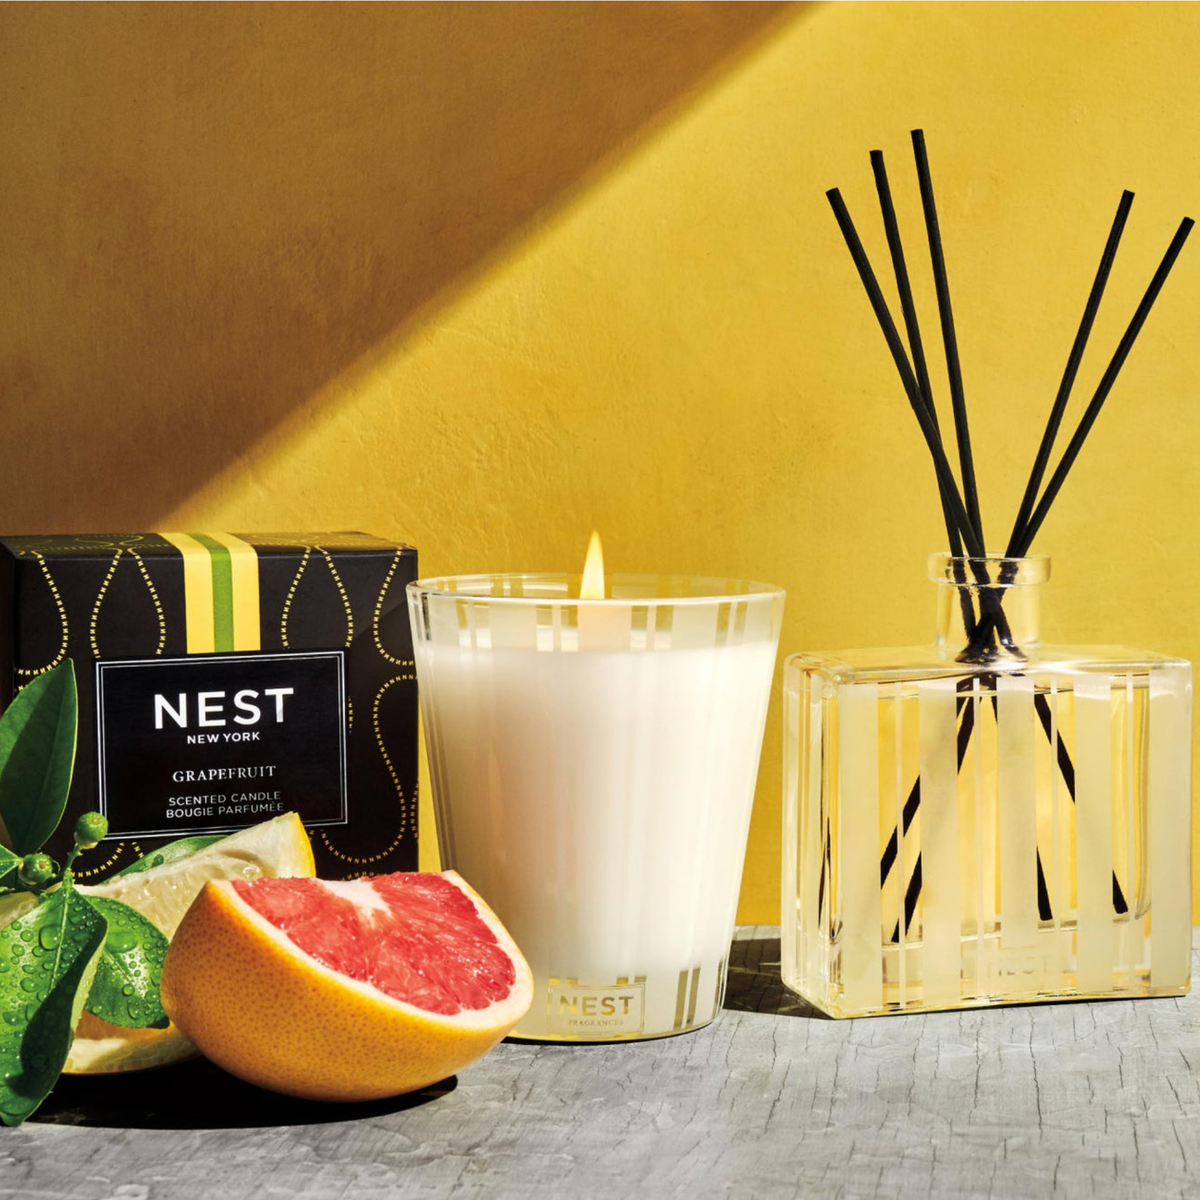 Nest New York’s Grapefruit Reed Diffuser Lifestyle With Candle